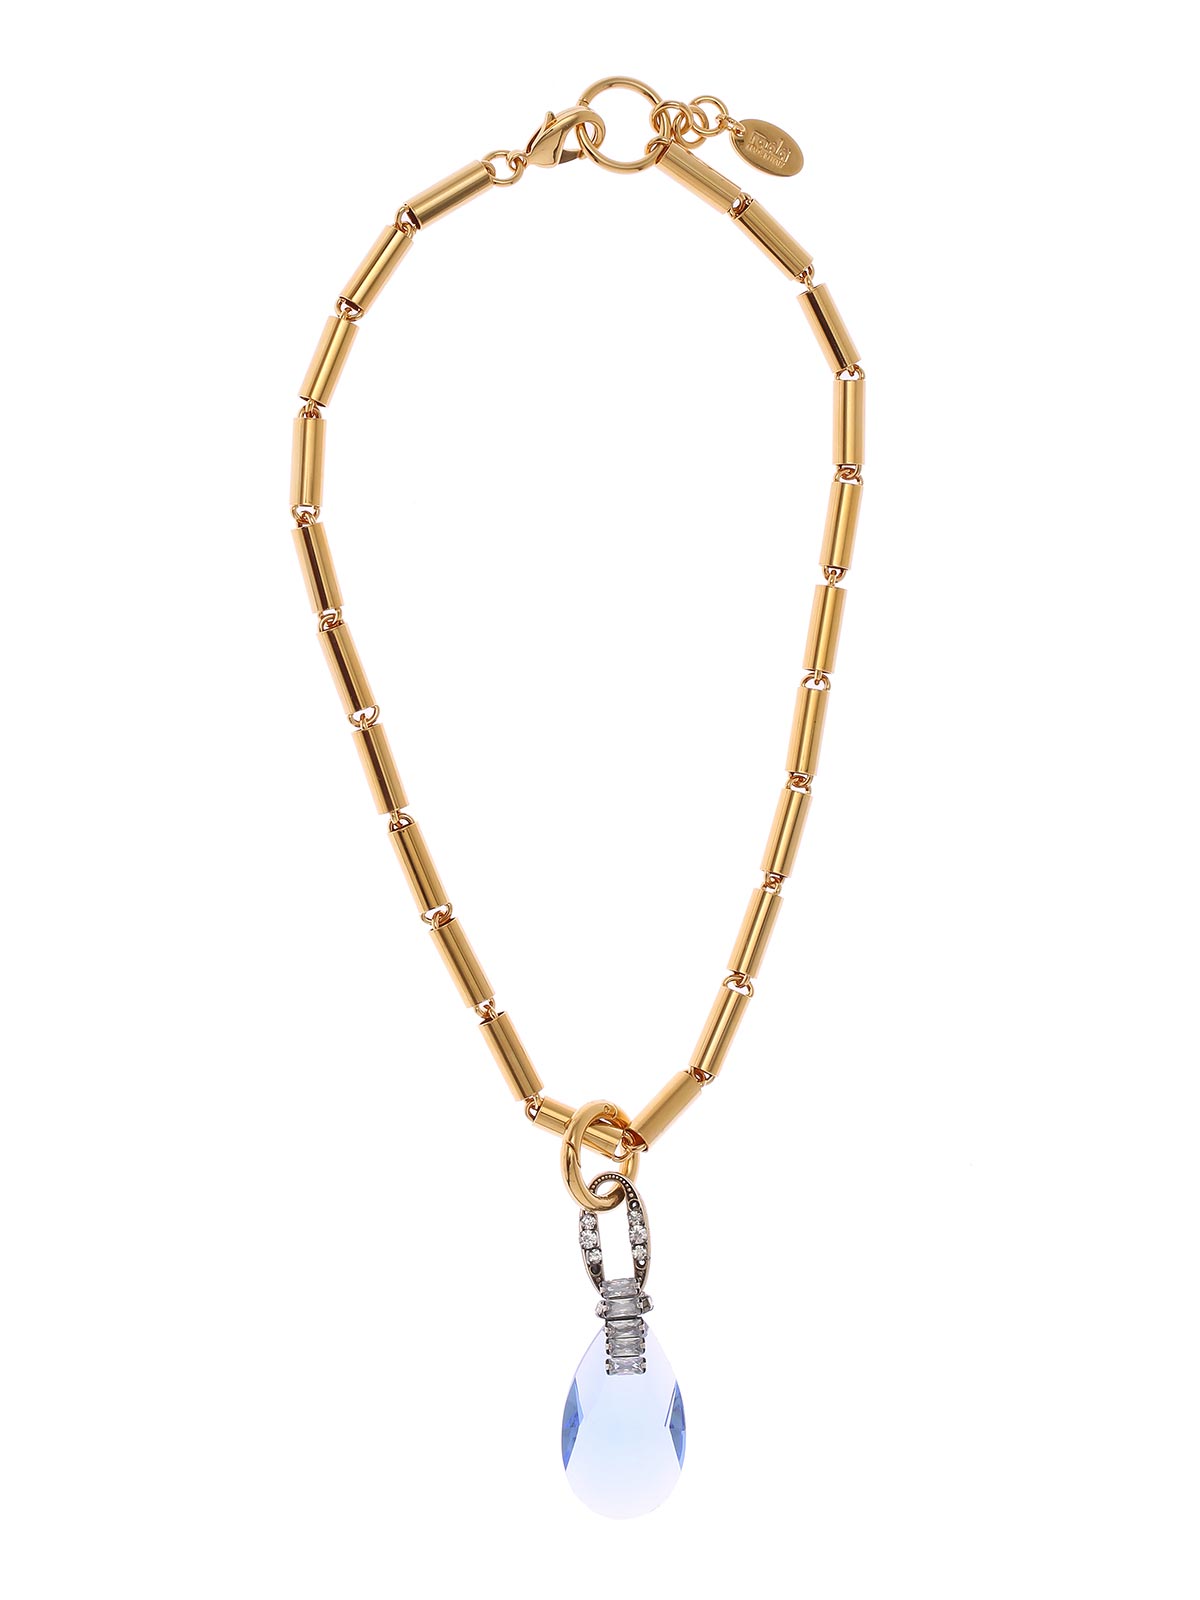  Brass necklace with metal tubes and jewel pendant